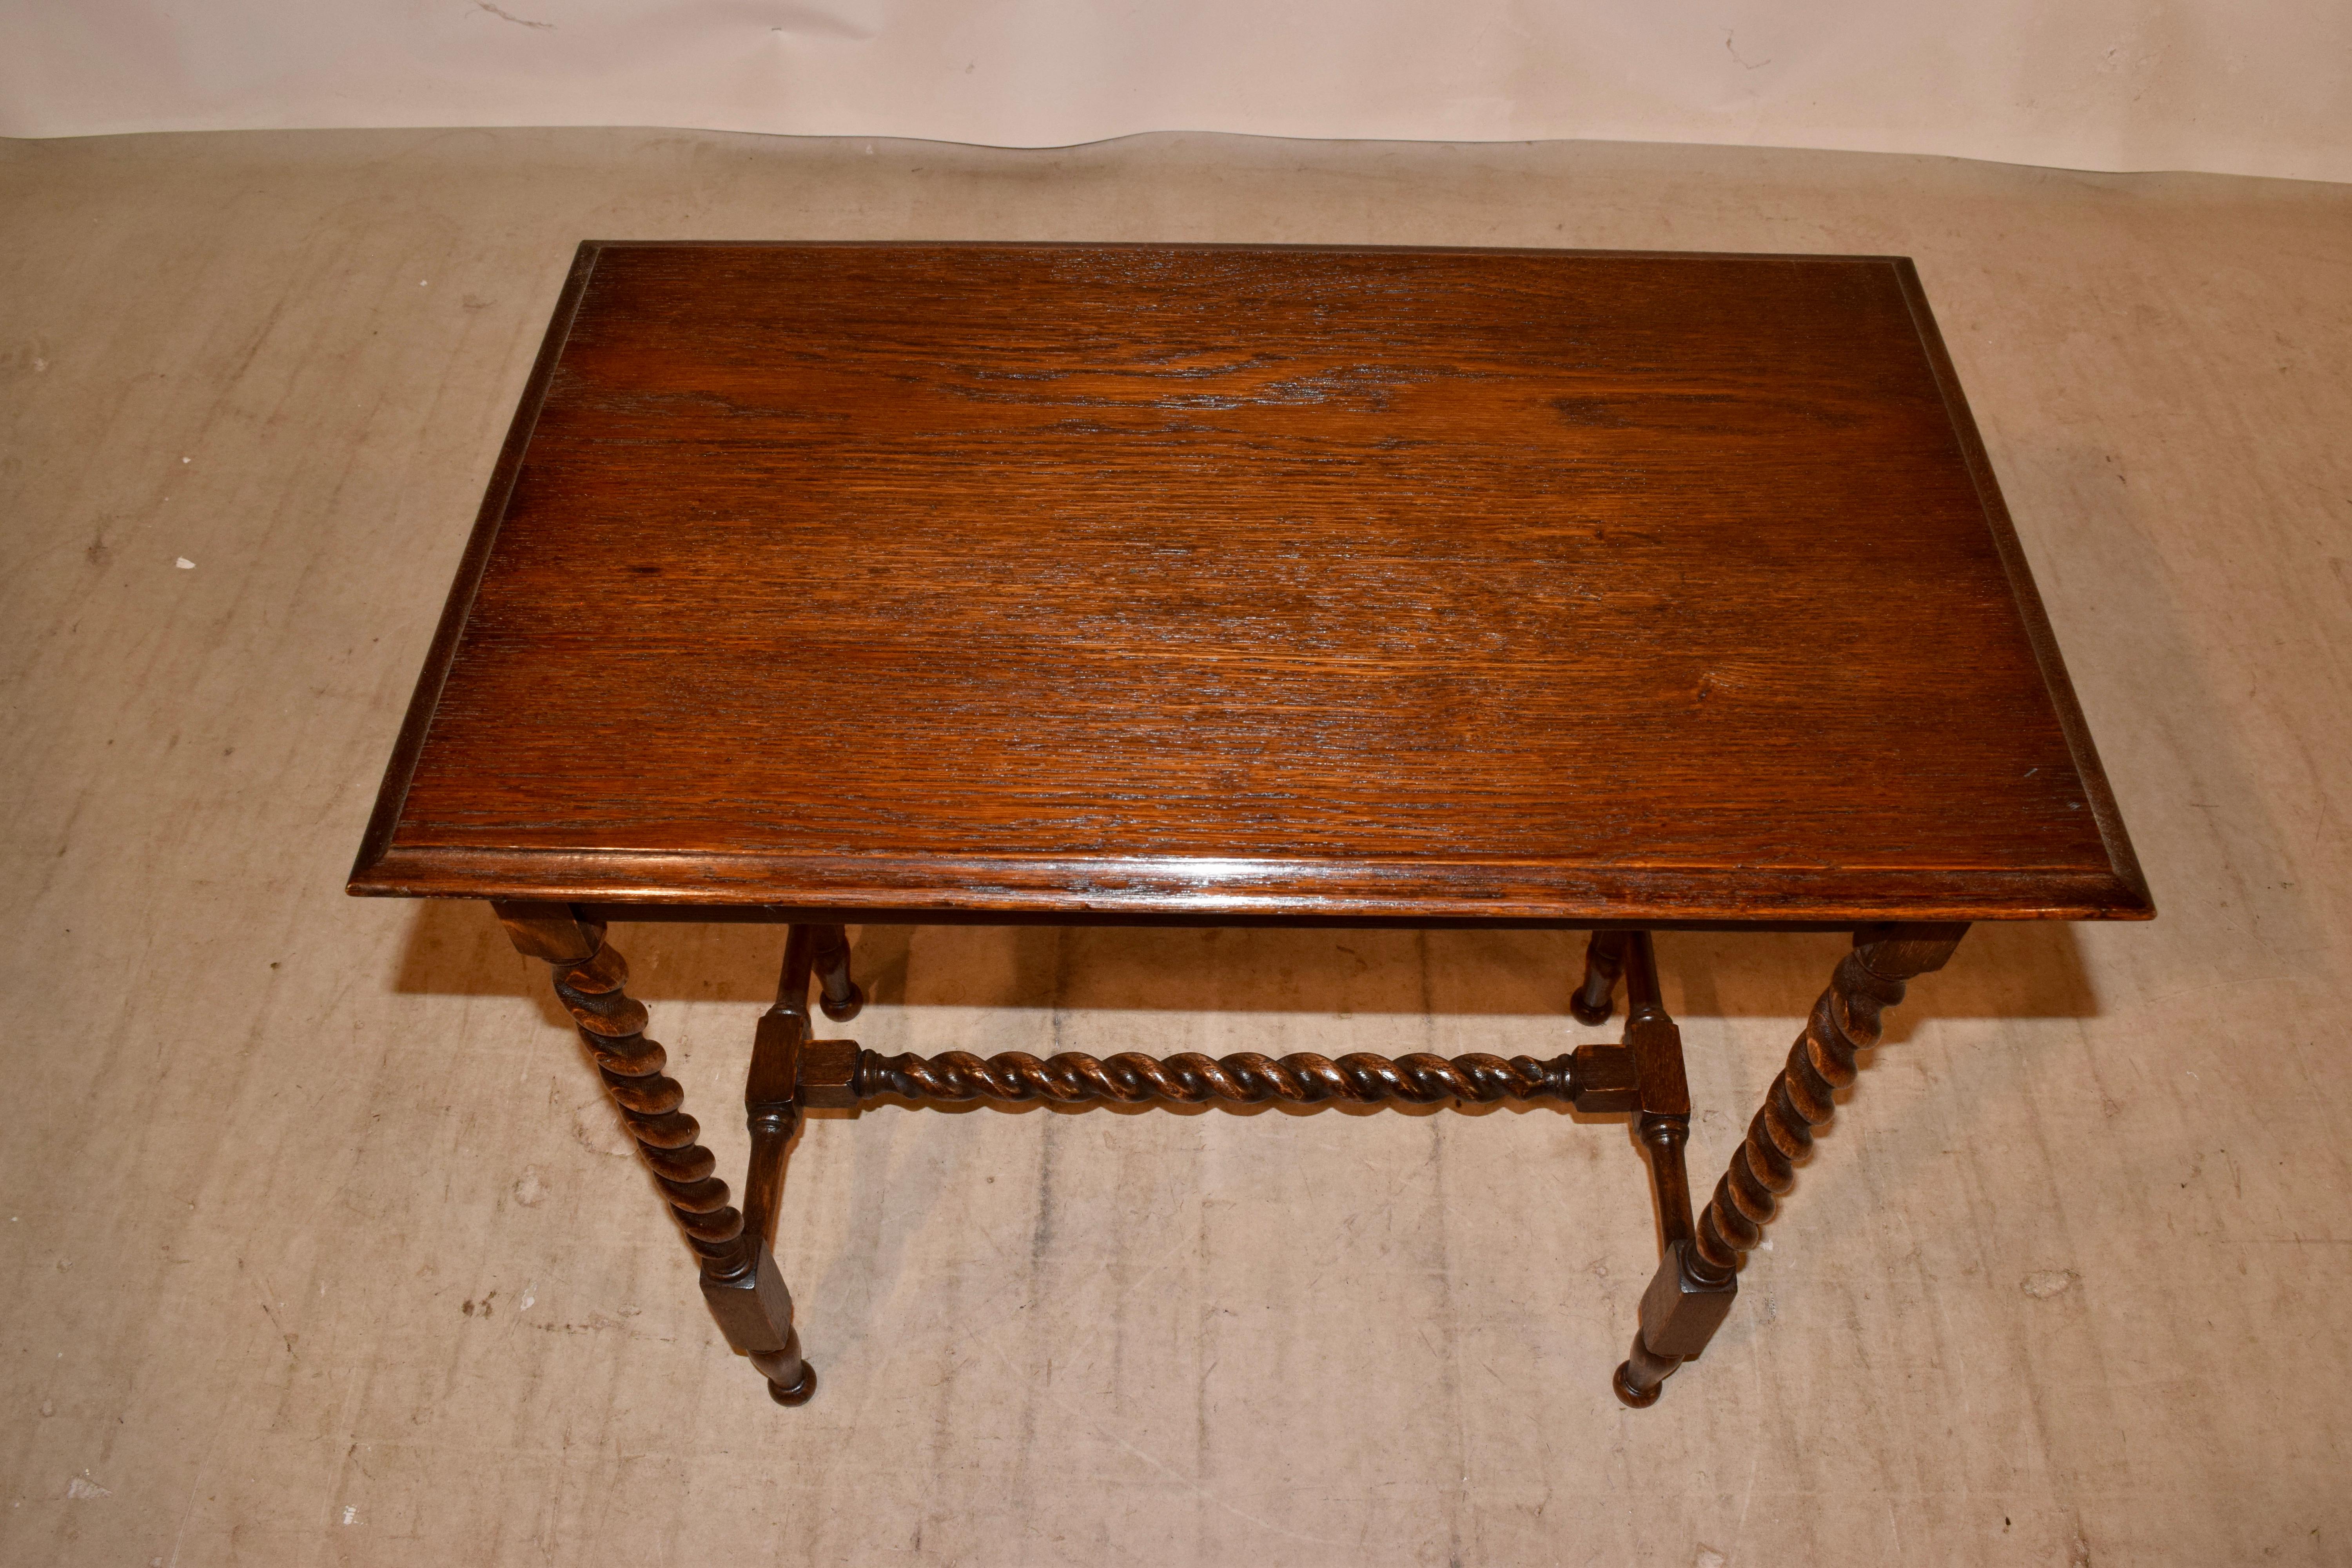 Early 20th Century English Oak Side Table, c. 1900